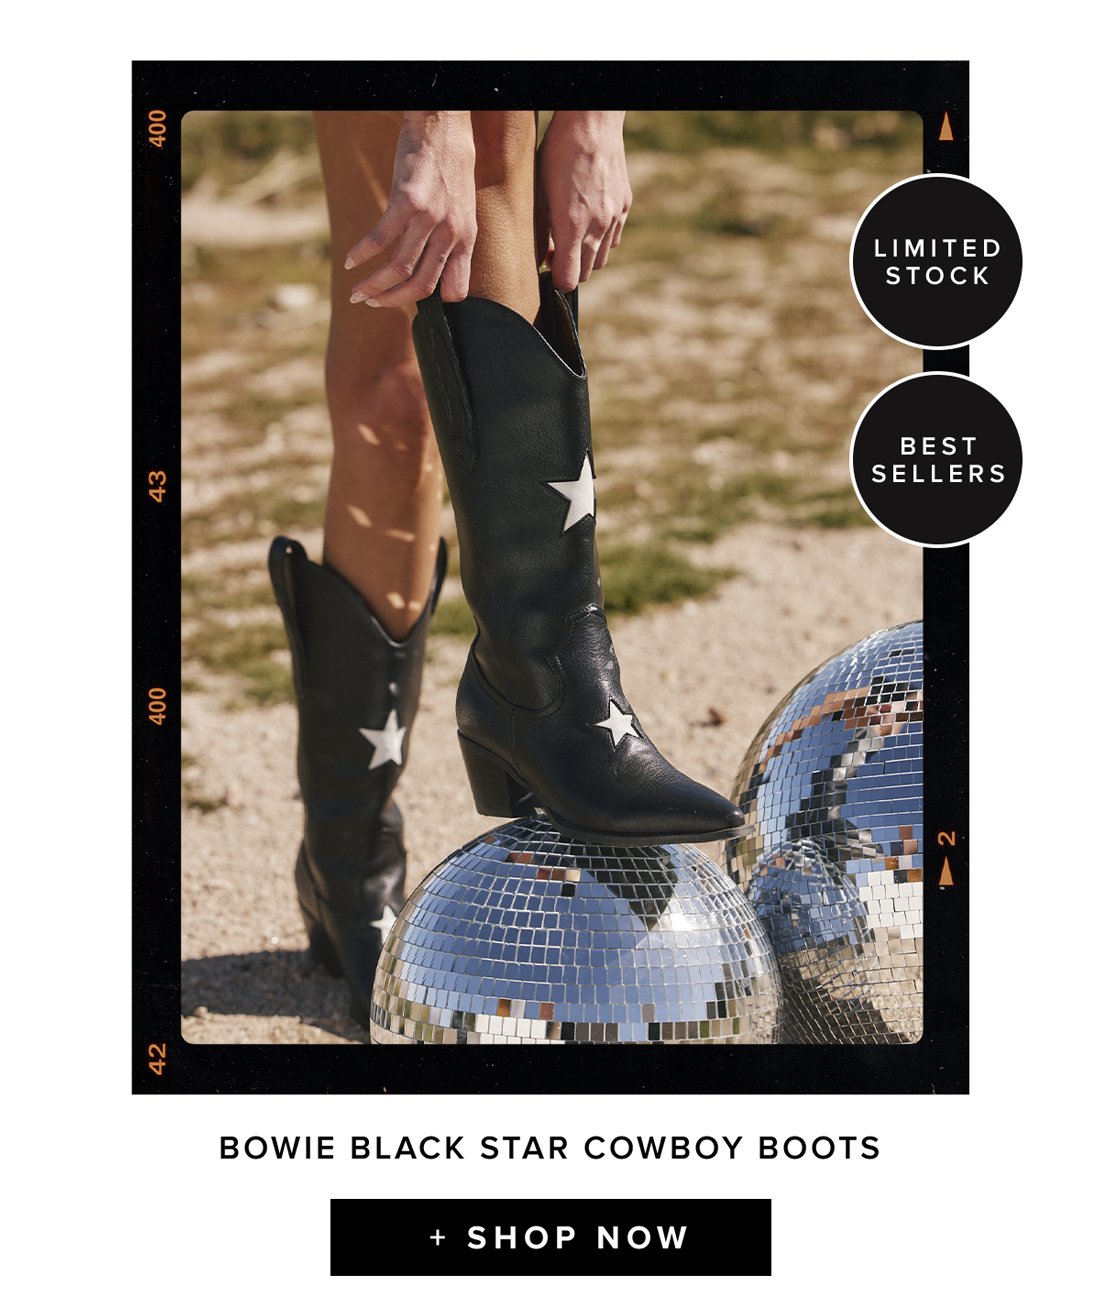 bowie black star cowboy boots limited stock best sellers shop now